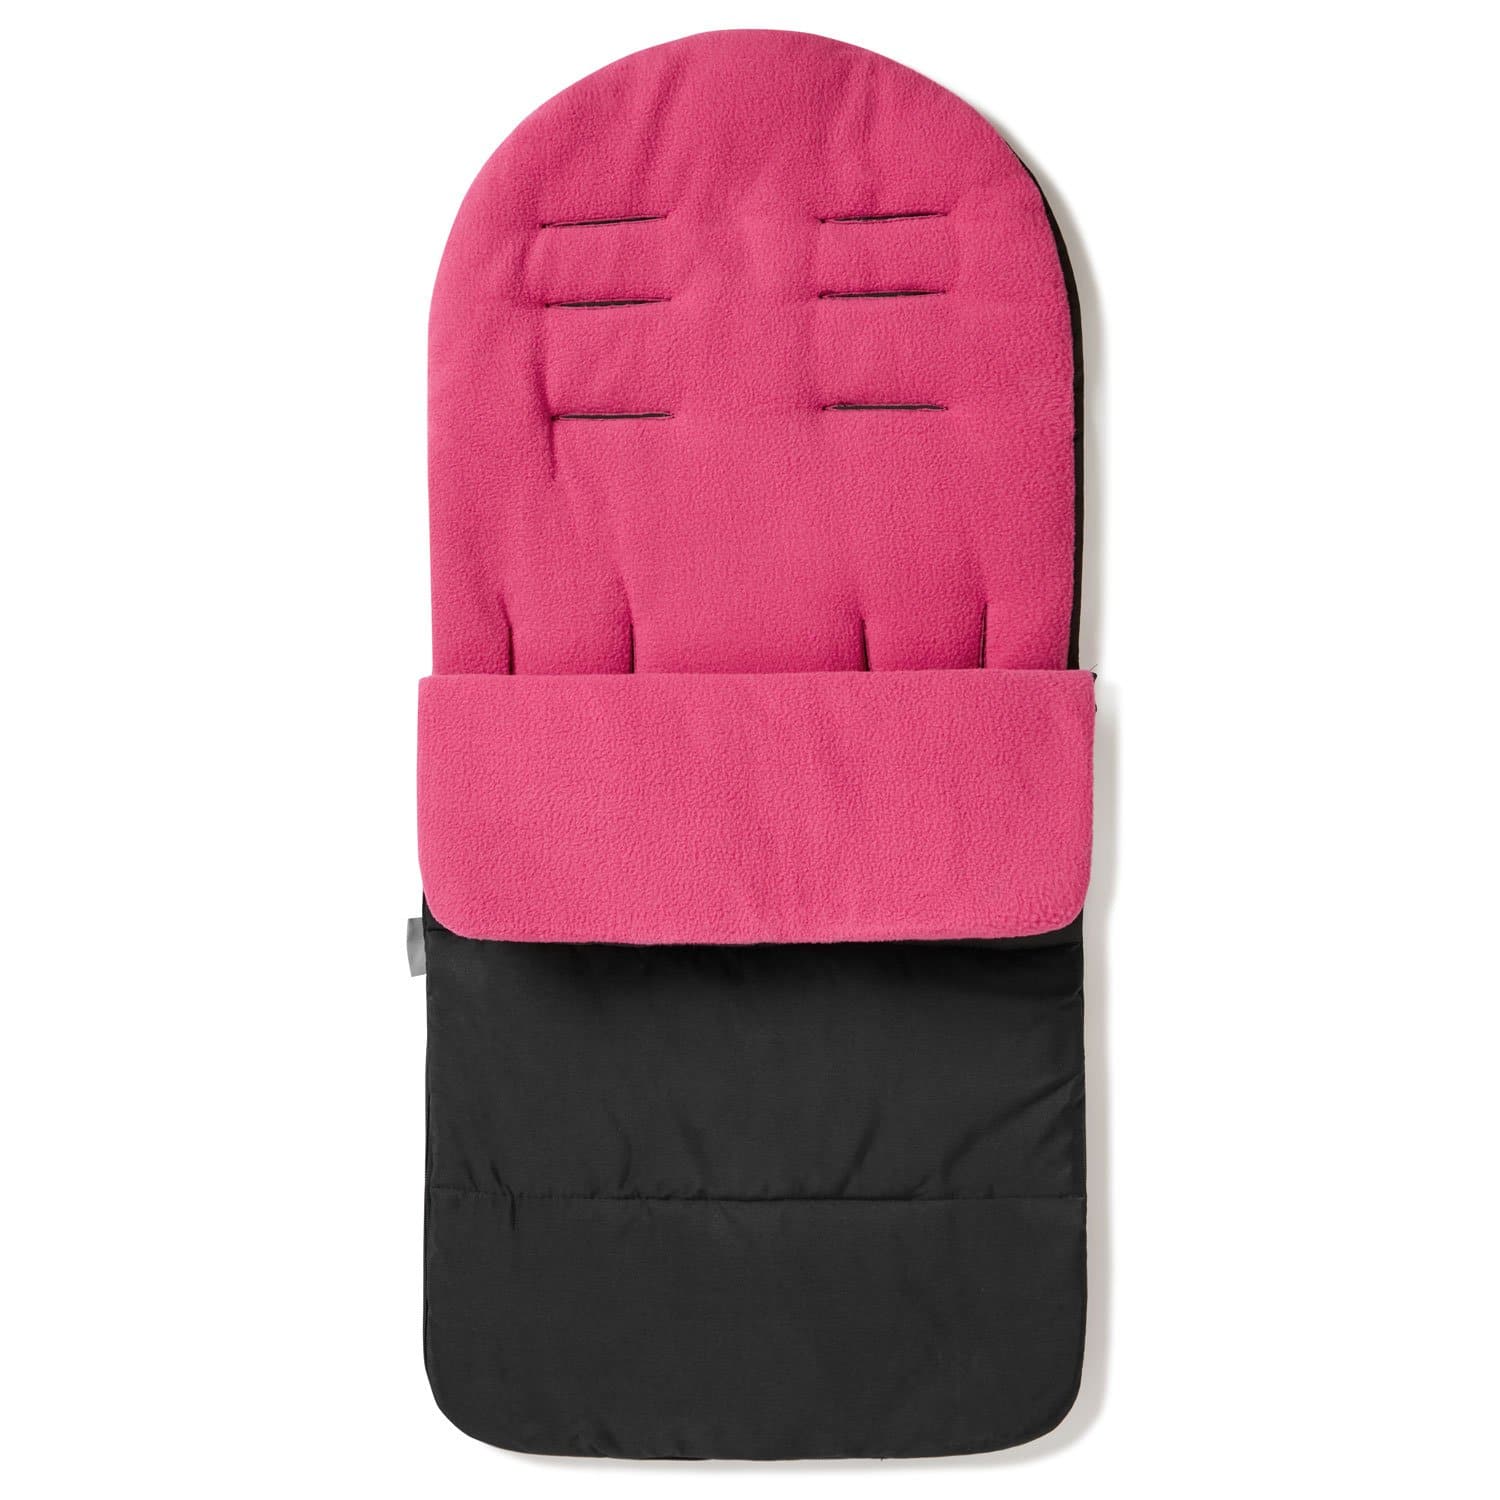 Premium Footmuff / Cosy Toes Compatible with Babyzen - Pink Rose / Fits All Models | For Your Little One